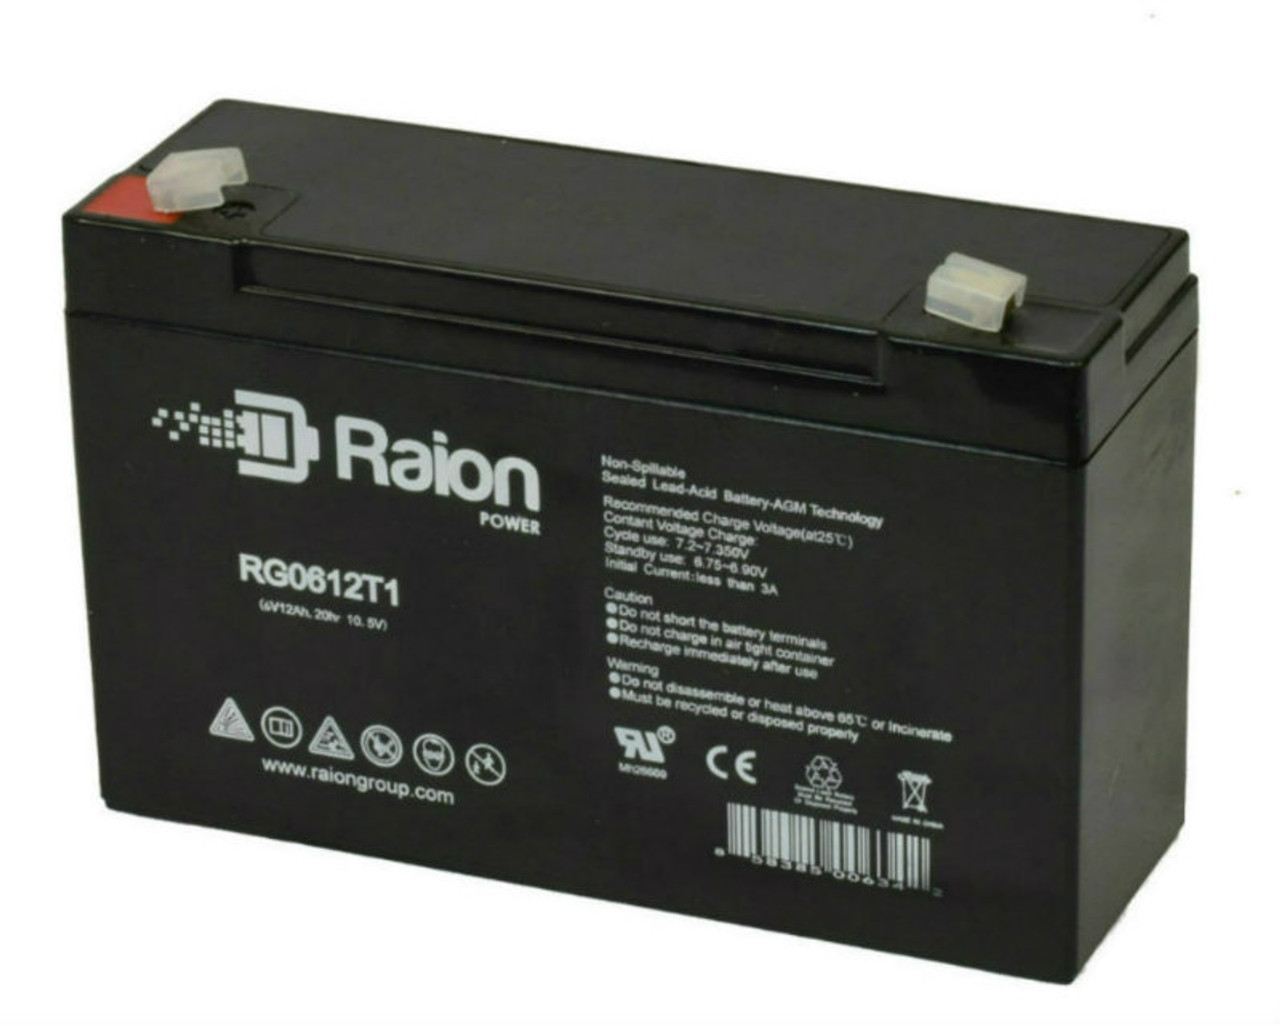 Raion Power RG06120T1 Replacement Battery for Amptek AT6-10